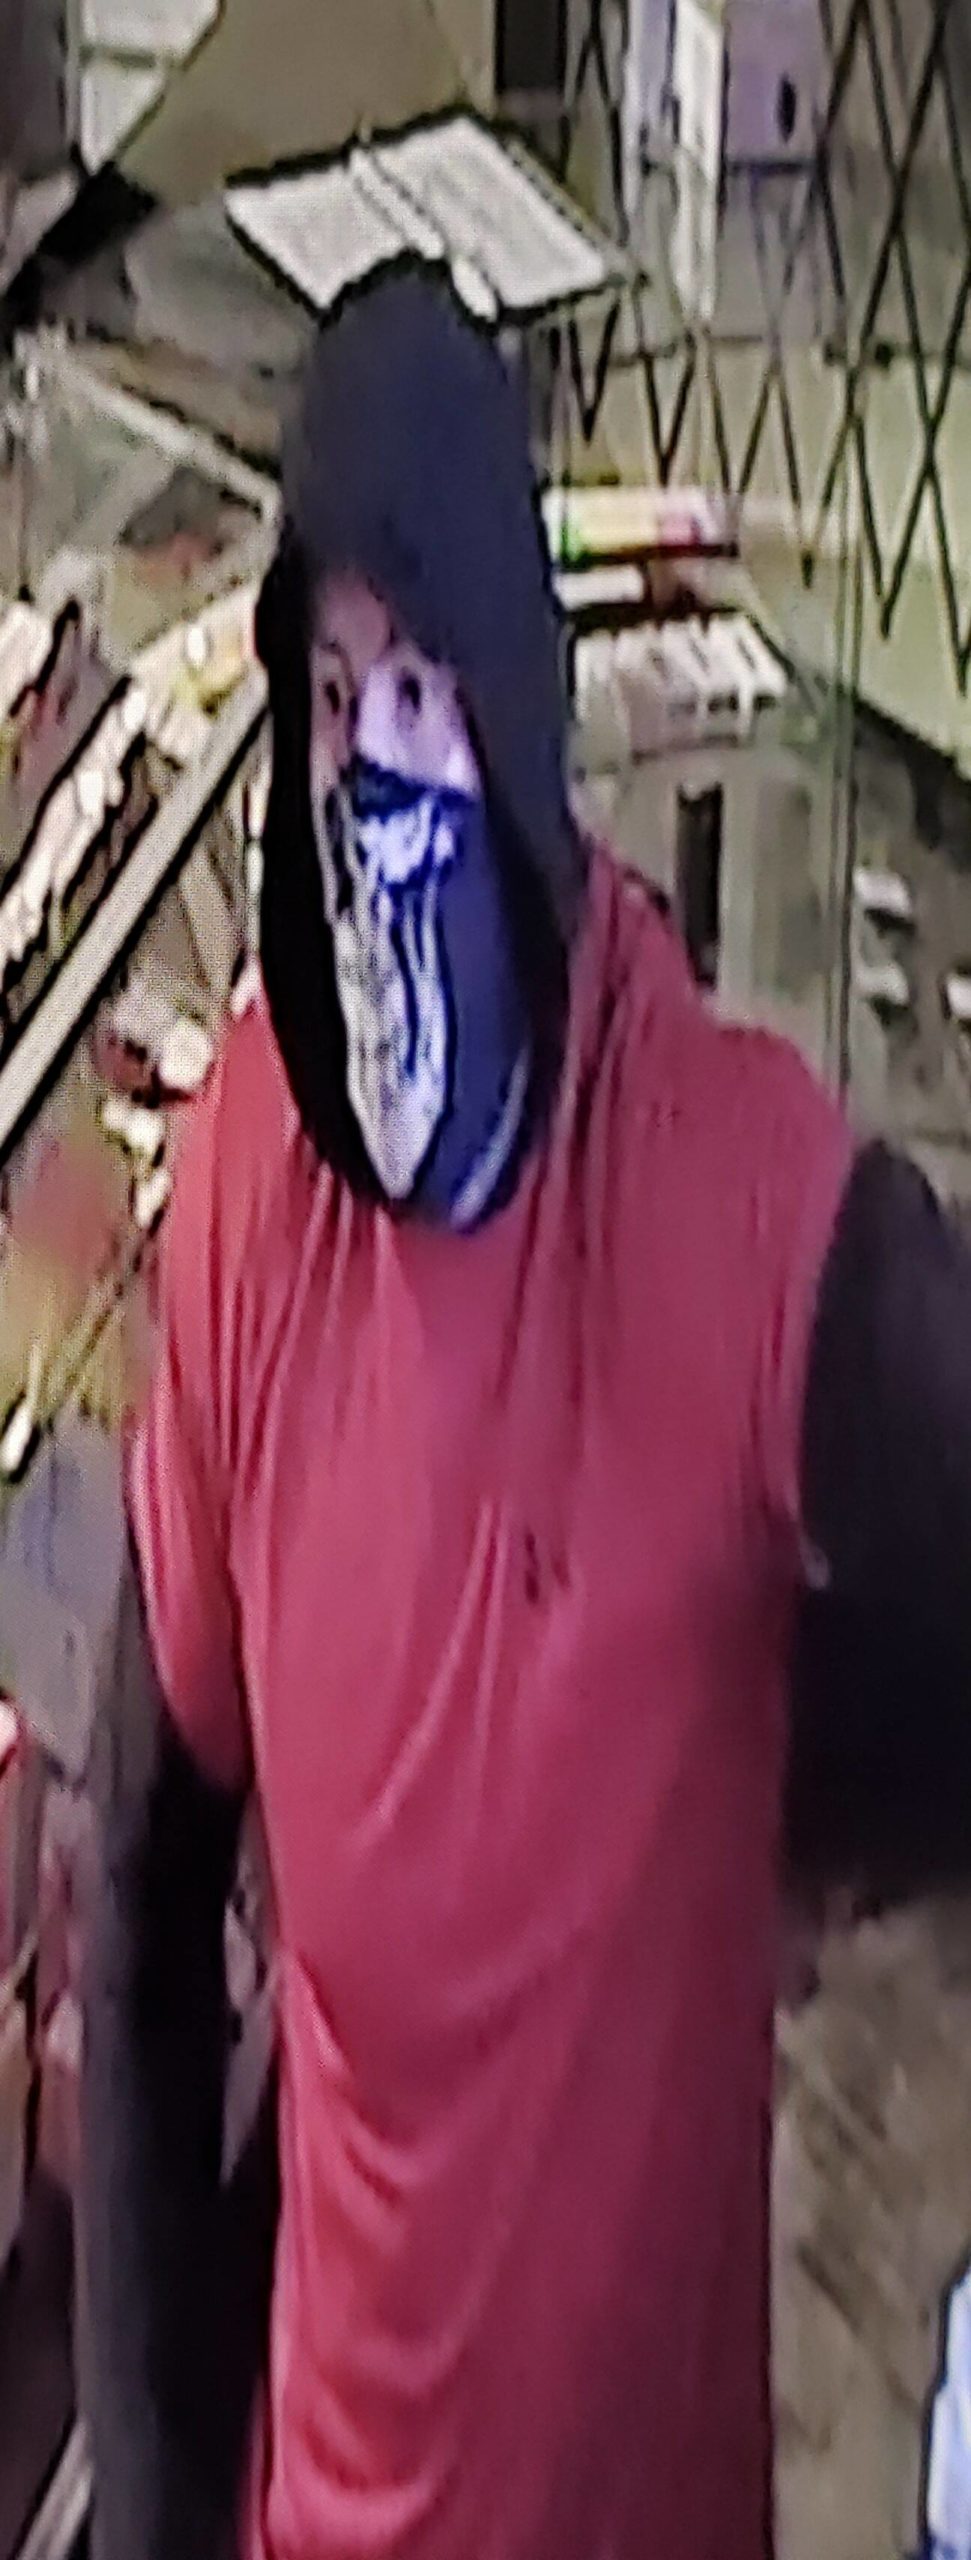 The suspect involved in the armed robbery (Penticton RCMP/File)